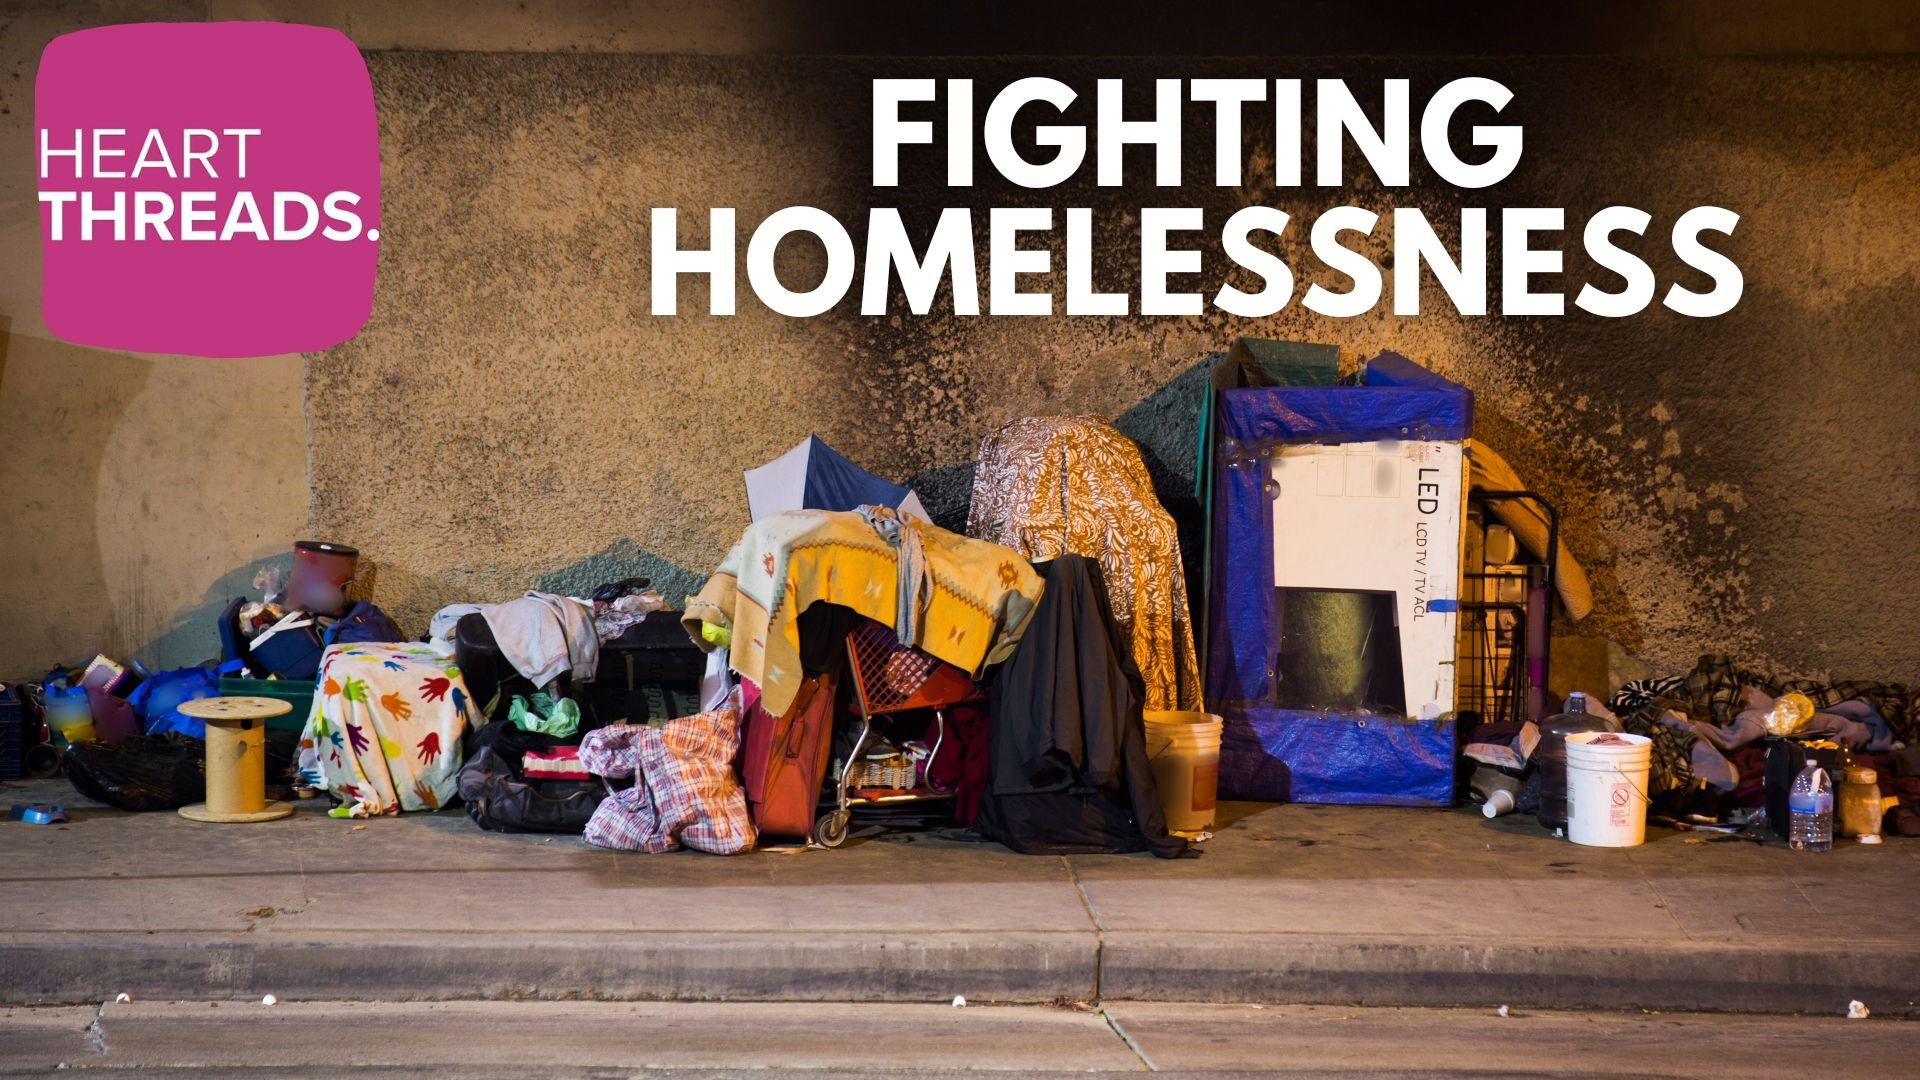 The fight to end homelessness is happening all over the U.S. A look at the organizations and people lending a helping hand.